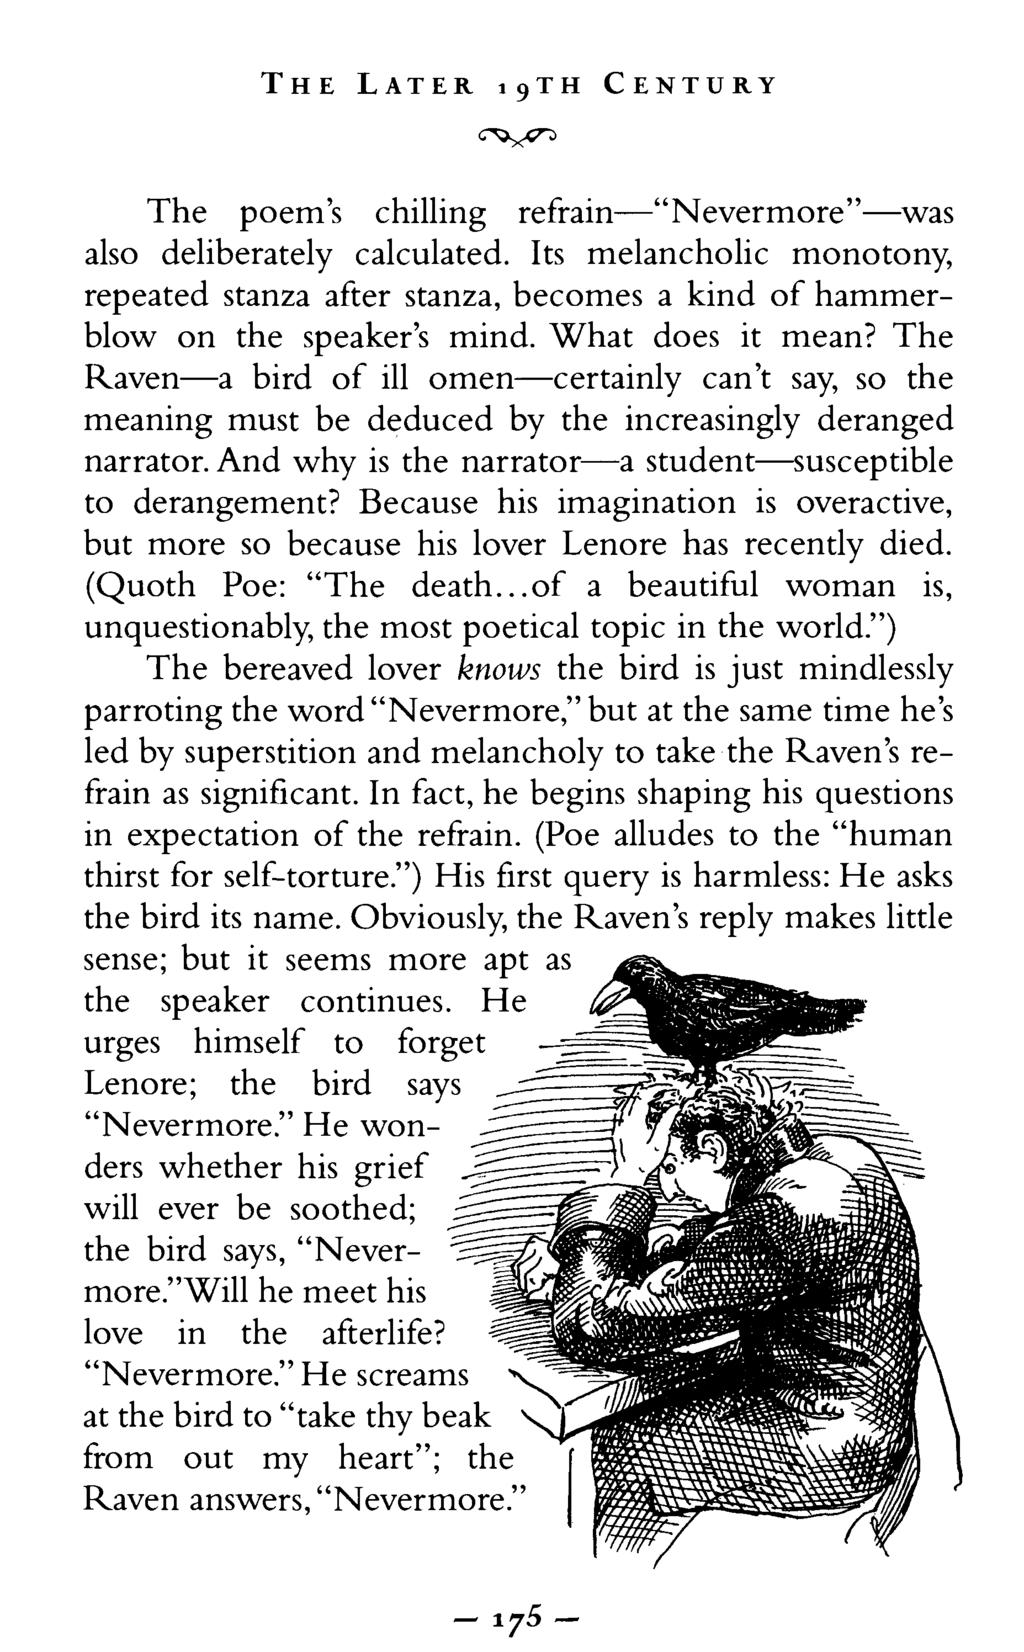 THE LATER I 9 TH CENTURY The poem's chilling refrain "Nevermore" was also deliberately calculated.